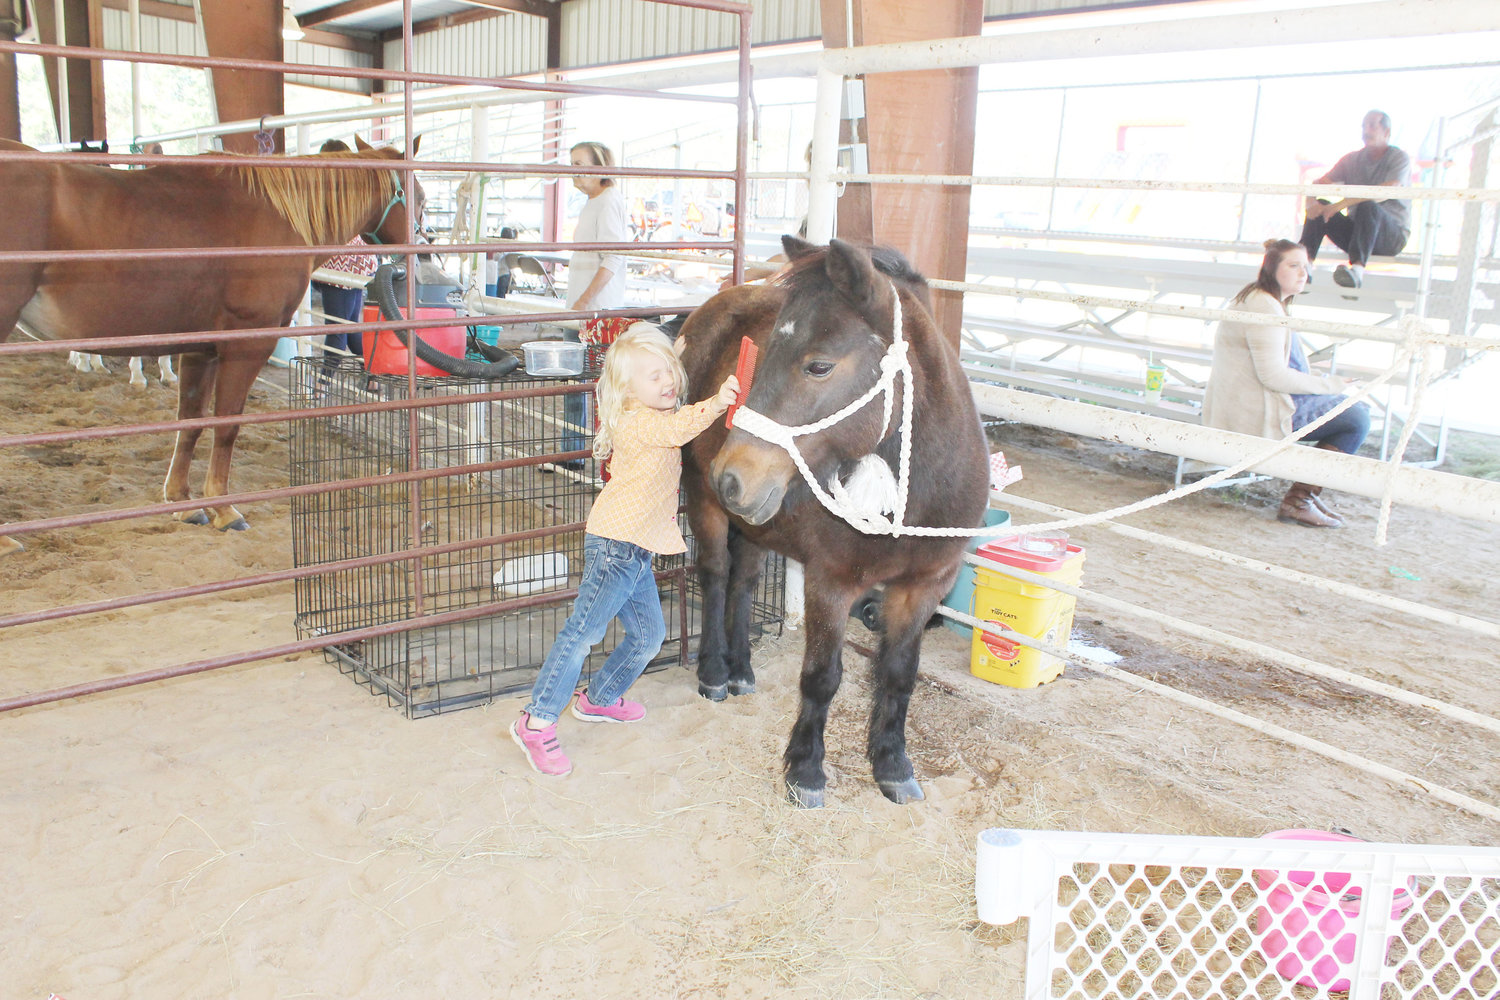 Little Addy Bolt puts some elbow grease into brushing a pony in the petting zoo in Golden Saturday.